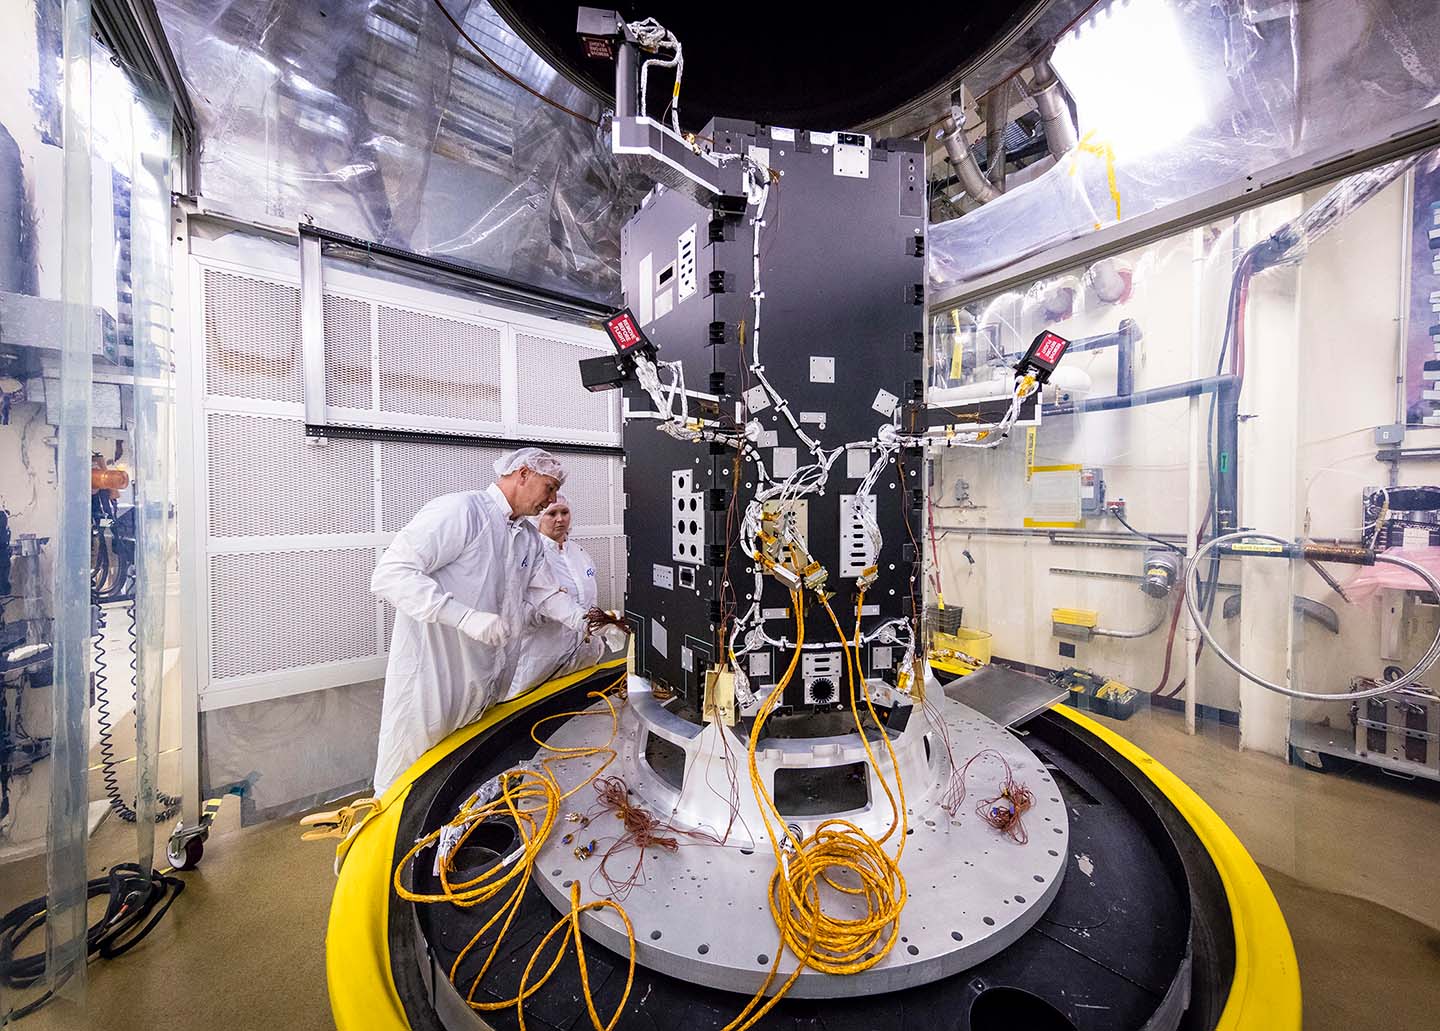 Engineers at the Johns Hopkins University Applied Physics Laboratory in Laurel, Maryland, prepare the developing Solar Probe Plus spacecraft for thermal vacuum tests that simulate conditions in space